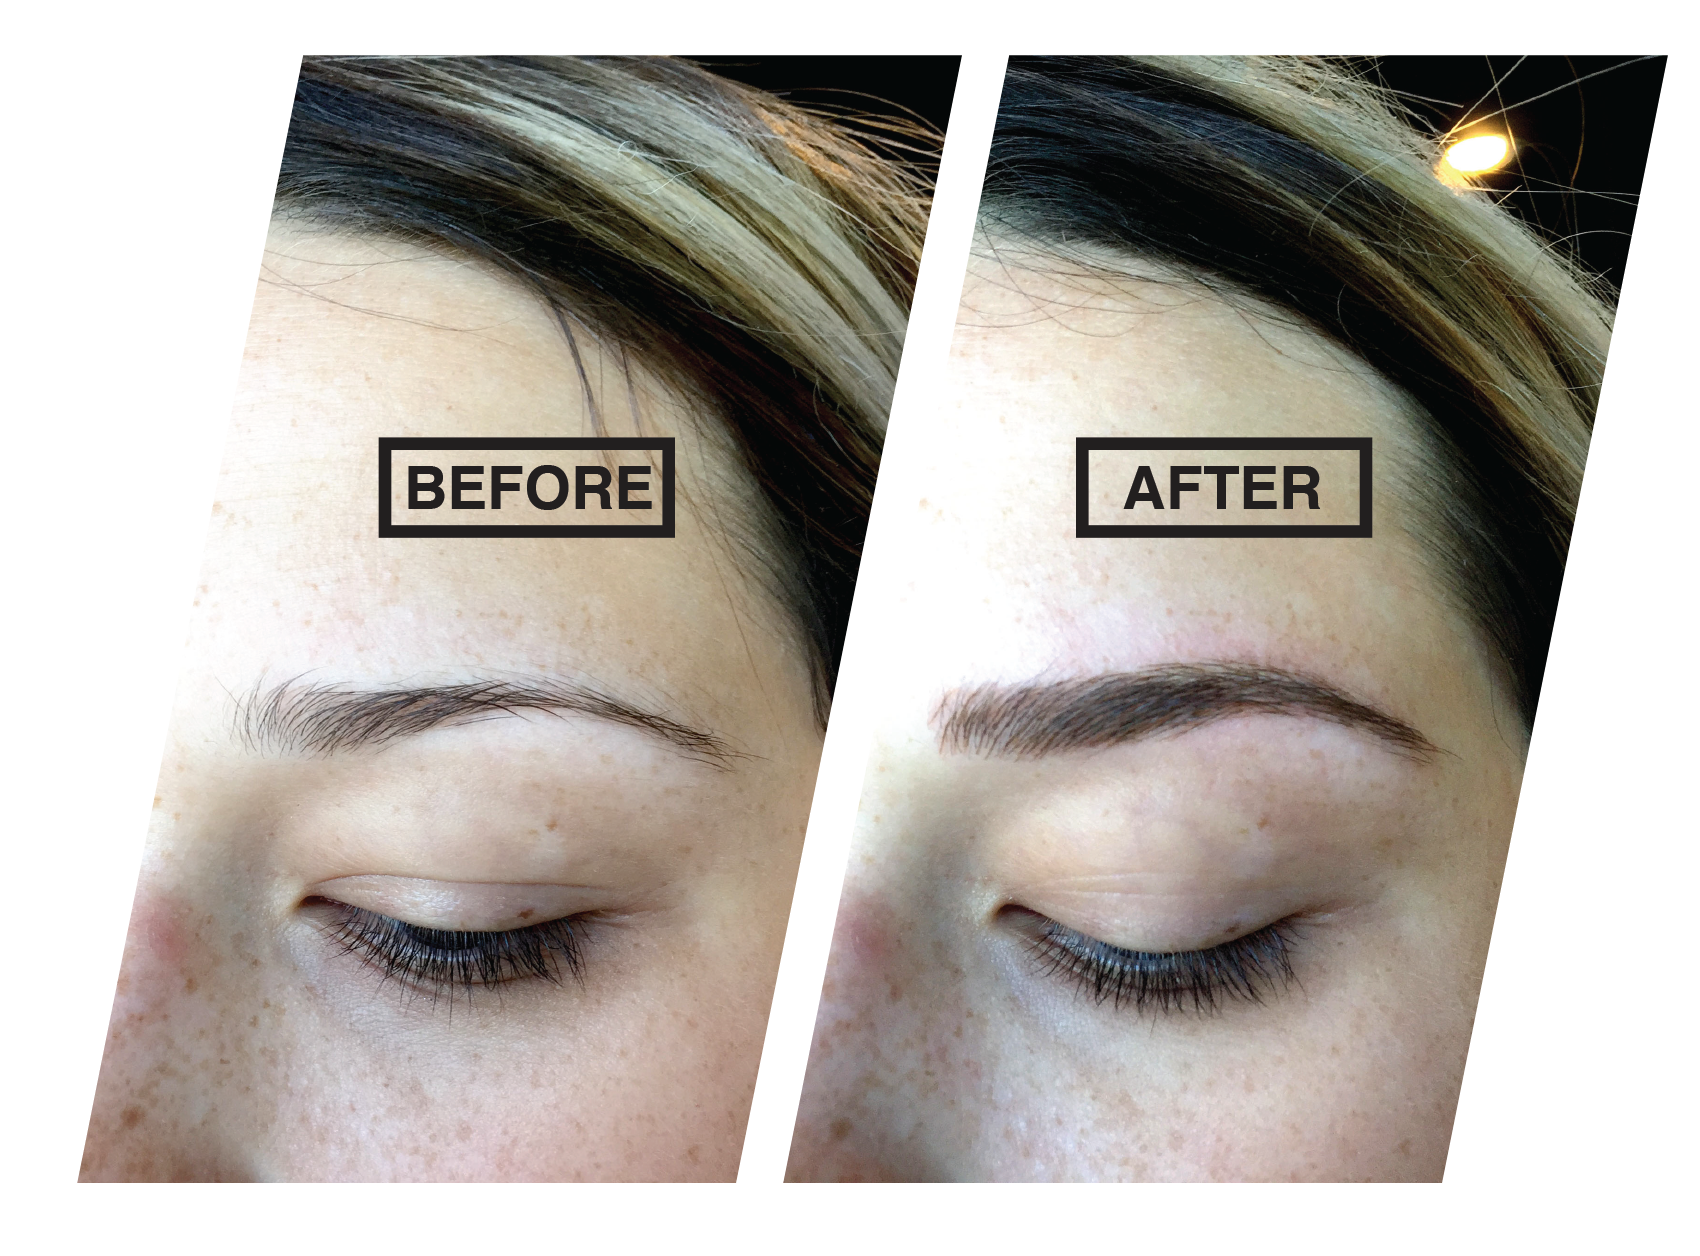 Chic Lash Microblading for $550